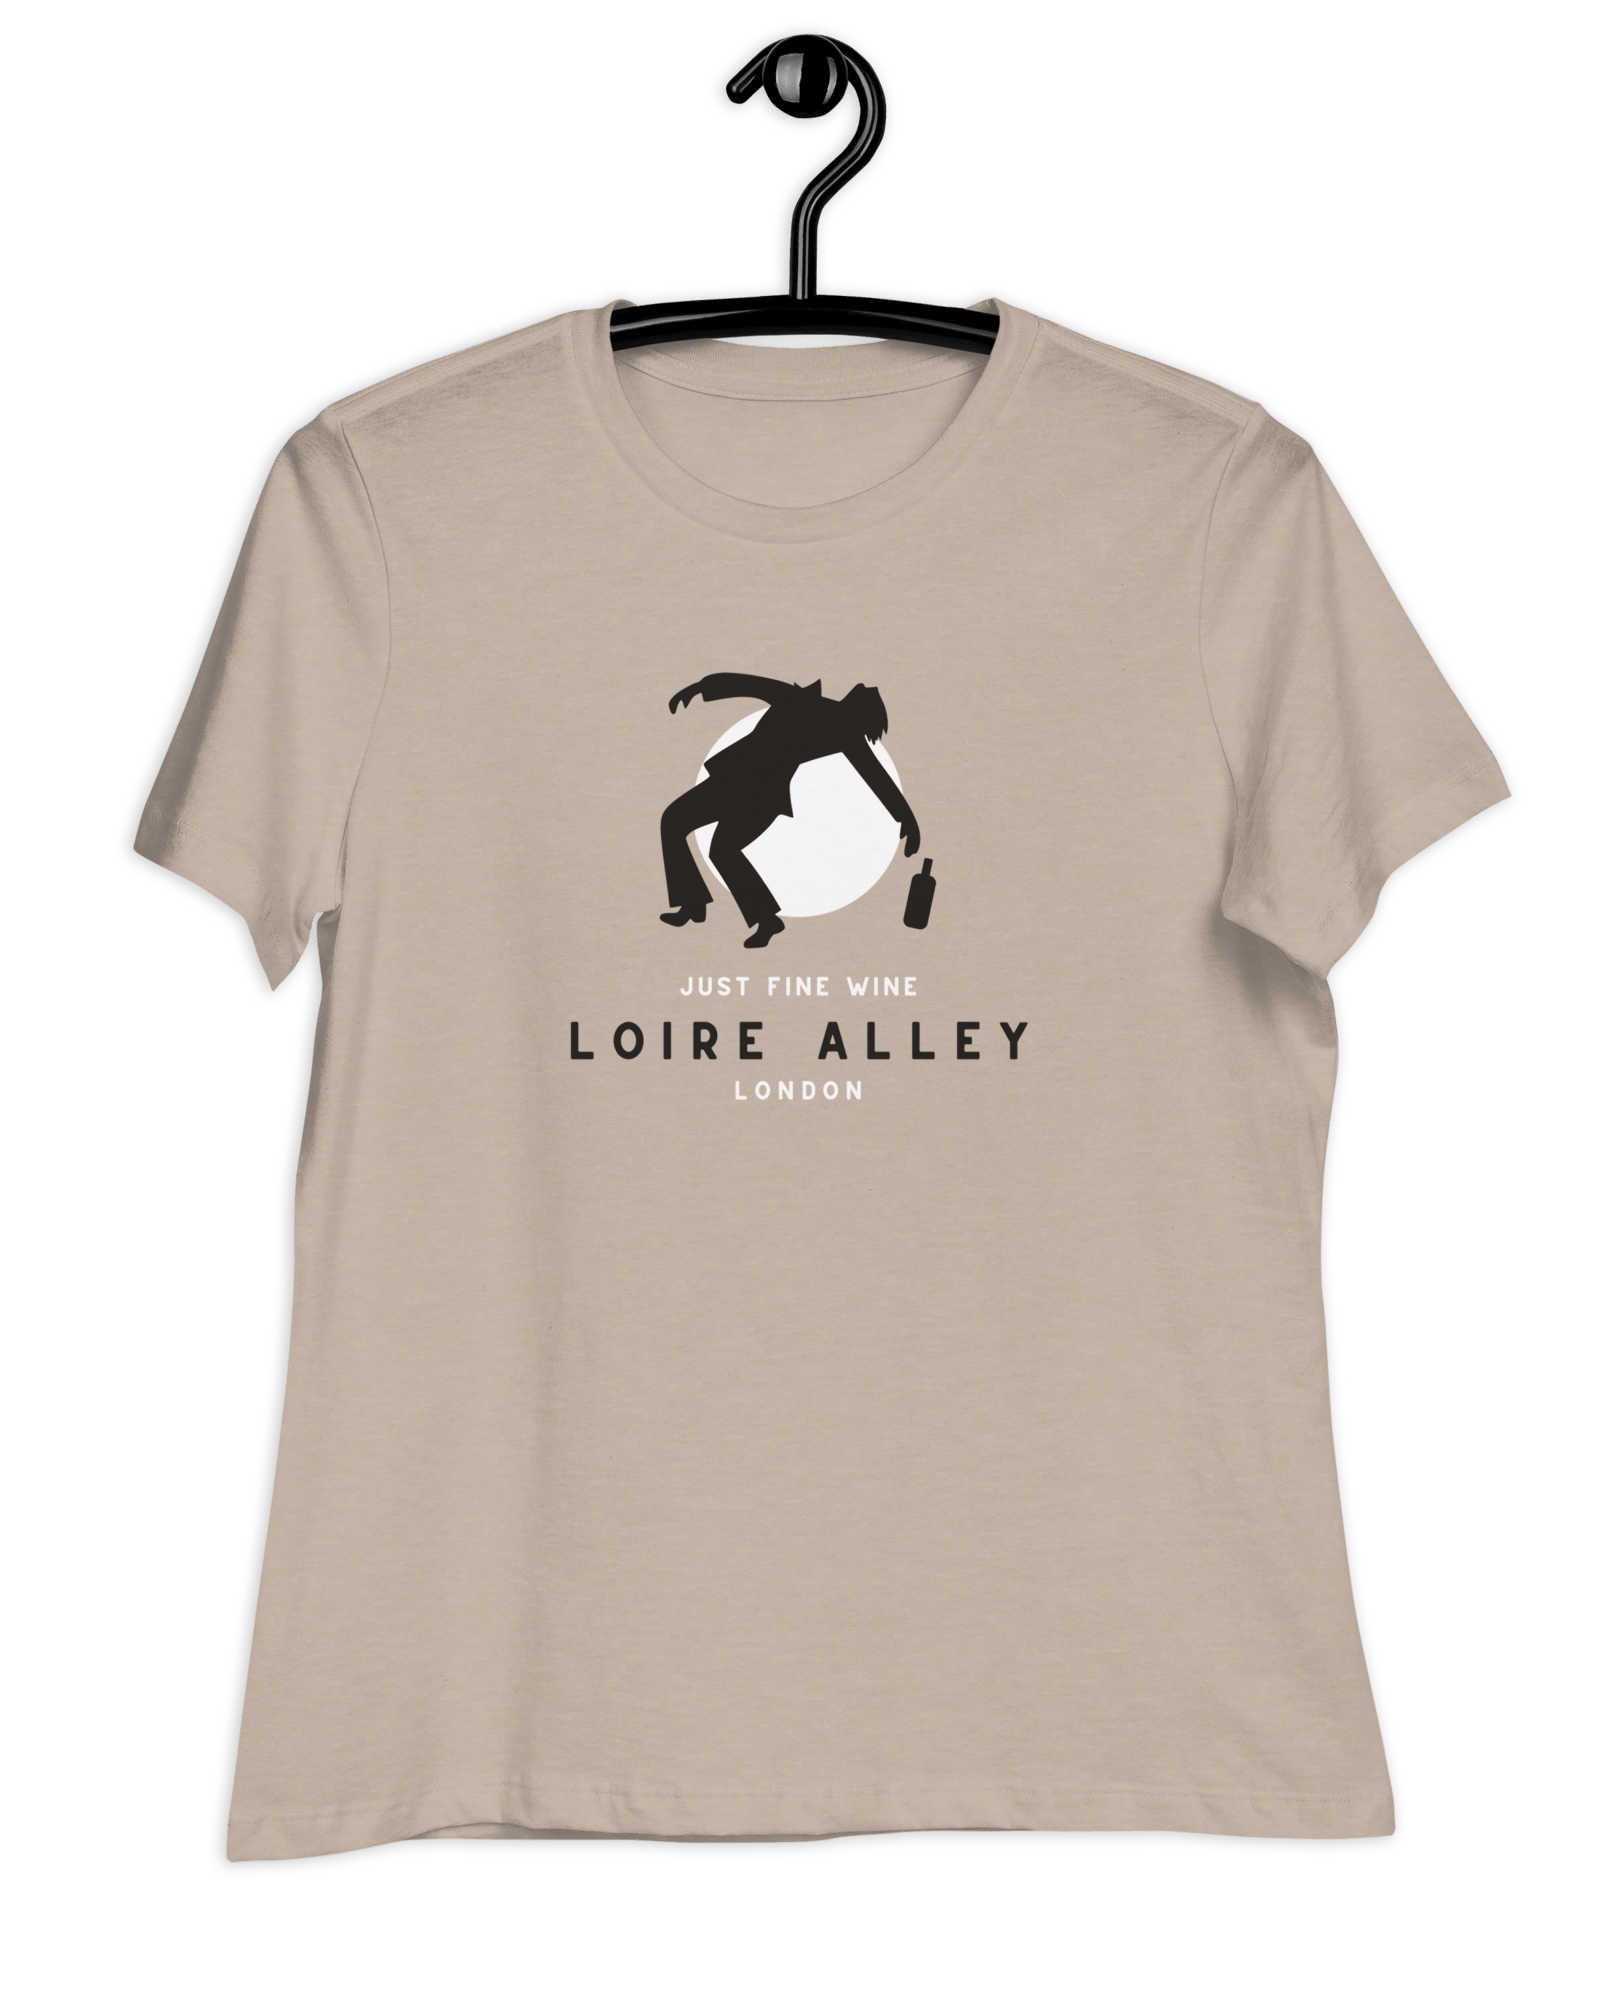 Loire Alley London Women's Relaxed T-Shirt Heather Stone / S Shirts & Tops Jolly & Goode